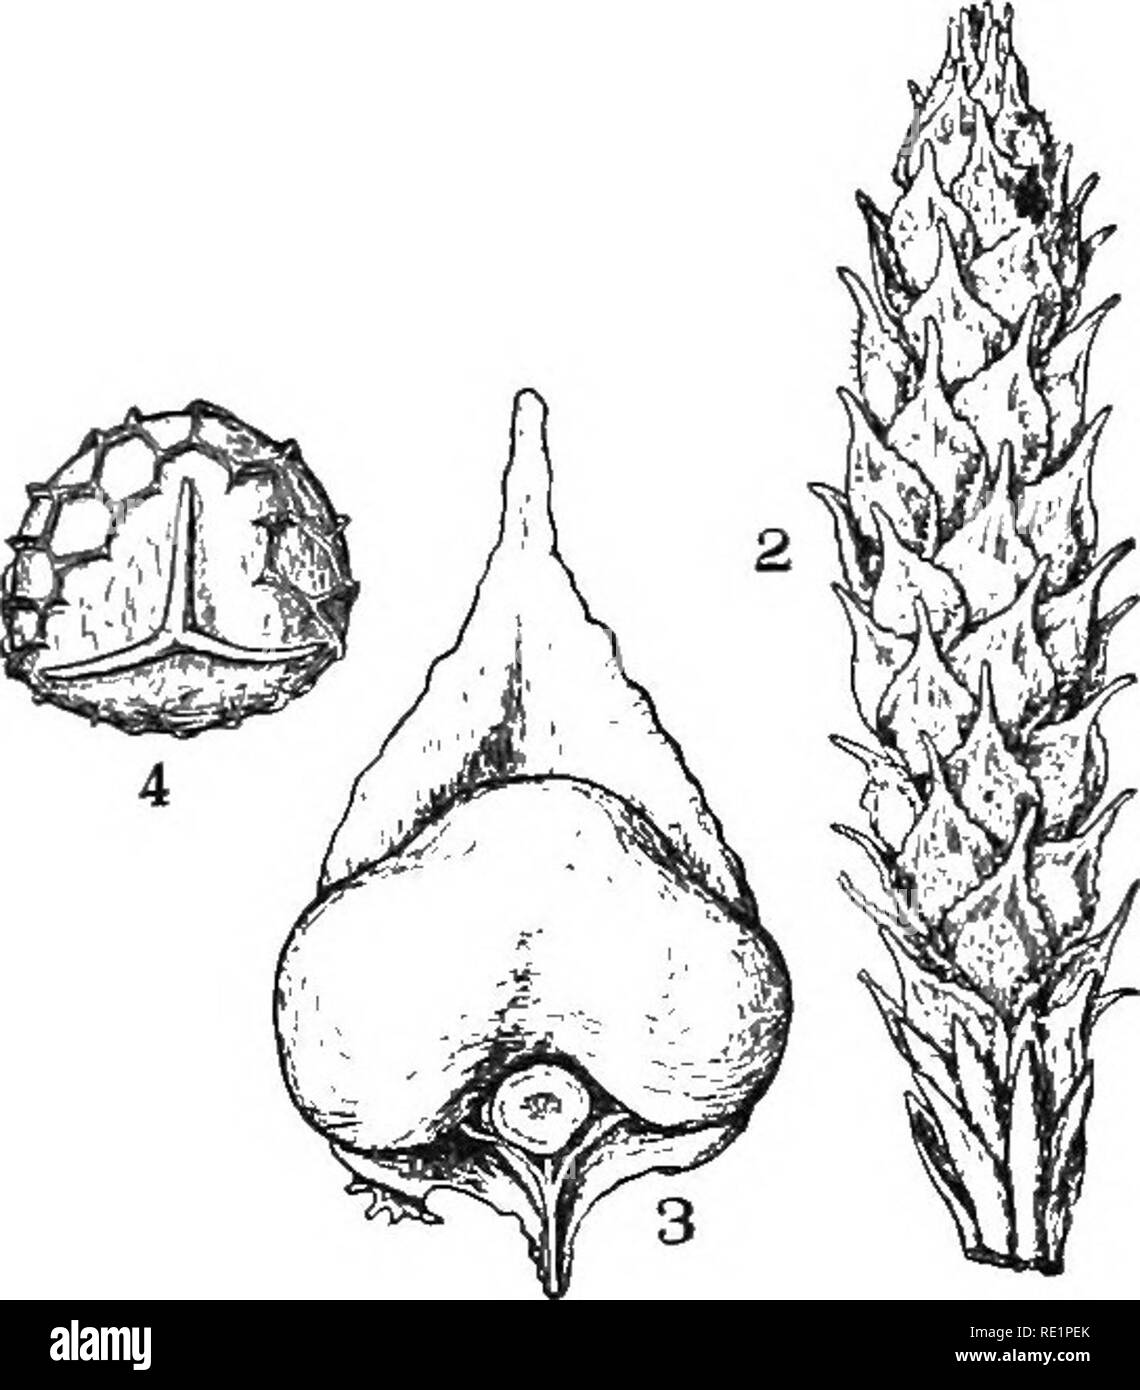 . Nature and development of plants. Botany. Fig. 238. Fig. 239. Fig. 238. Phylloglossum Drummondi.—After Pritzel. Fig. 239. Strobilus and sporophylls of Lycopodium: 2, strobilus. 3, a leaf or sporophyll from the strobilus enlarged and showing attached spo- rangium. 4, a spore greatly magnified. greatest abundance in the coal age and thence gradually declined, being crowded out by the more specialized seed plants. There are two important families of the Lycopodiales: i, Lycopodiaceae; 2, Selaginellaceae. 116. Family i. Lycopodiaceae.—With but one exception the members of this family belong to t Stock Photo